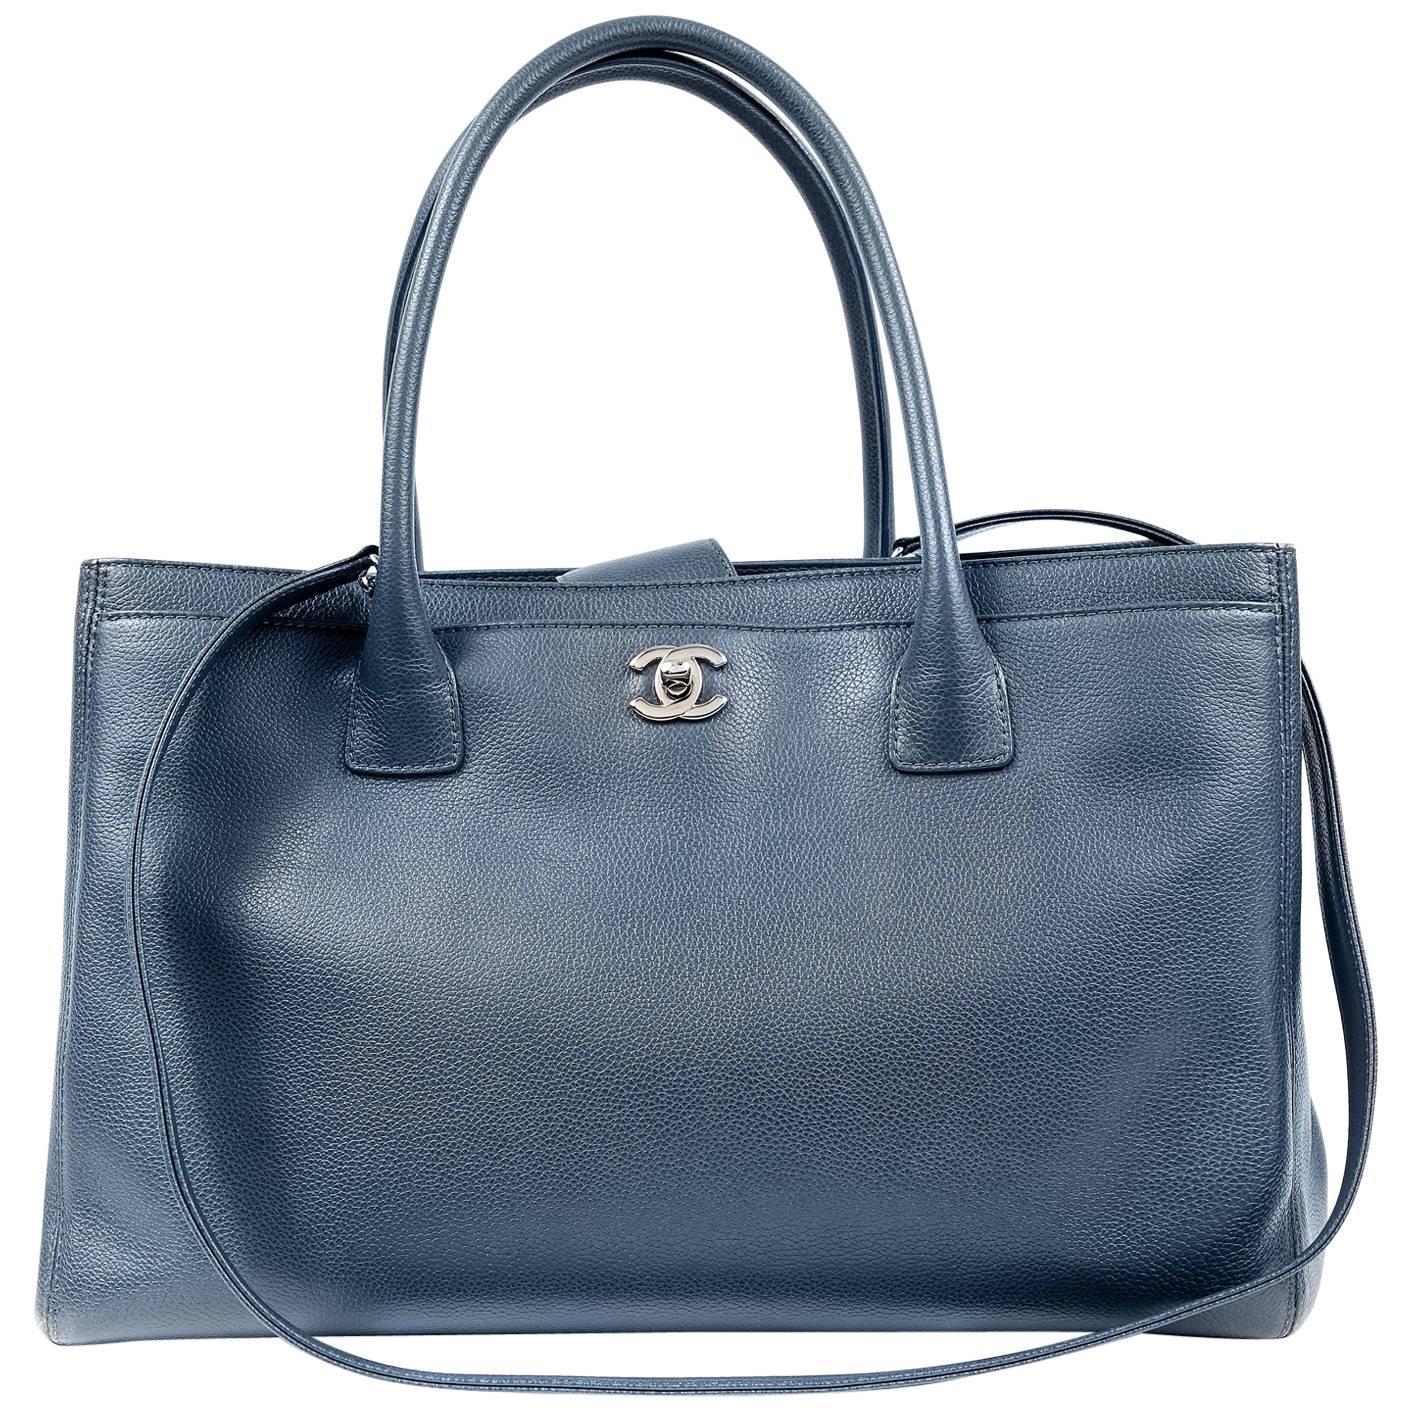 Chanel Navy Blue Leather Cerf tote